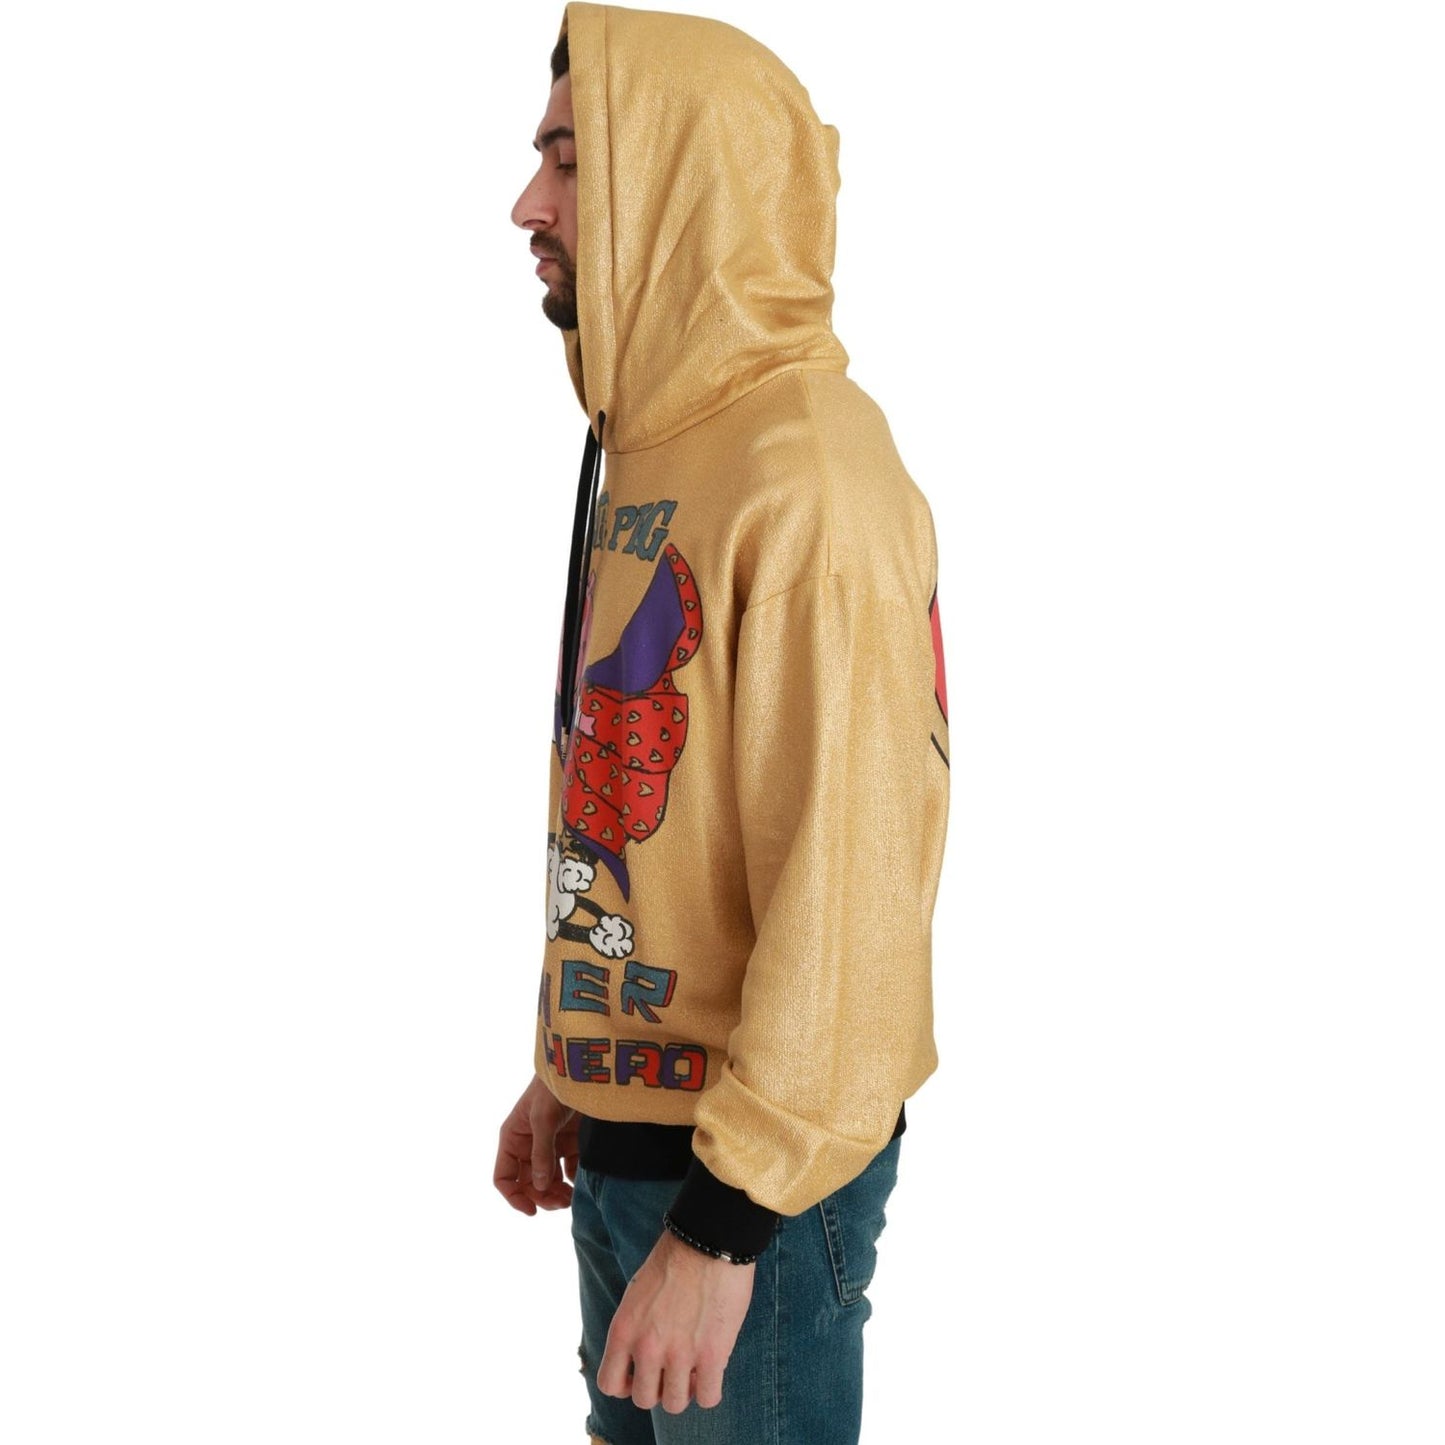 Dolce & Gabbana | Gold Pig of the Year Hooded Sweater | McRichard Designer Brands